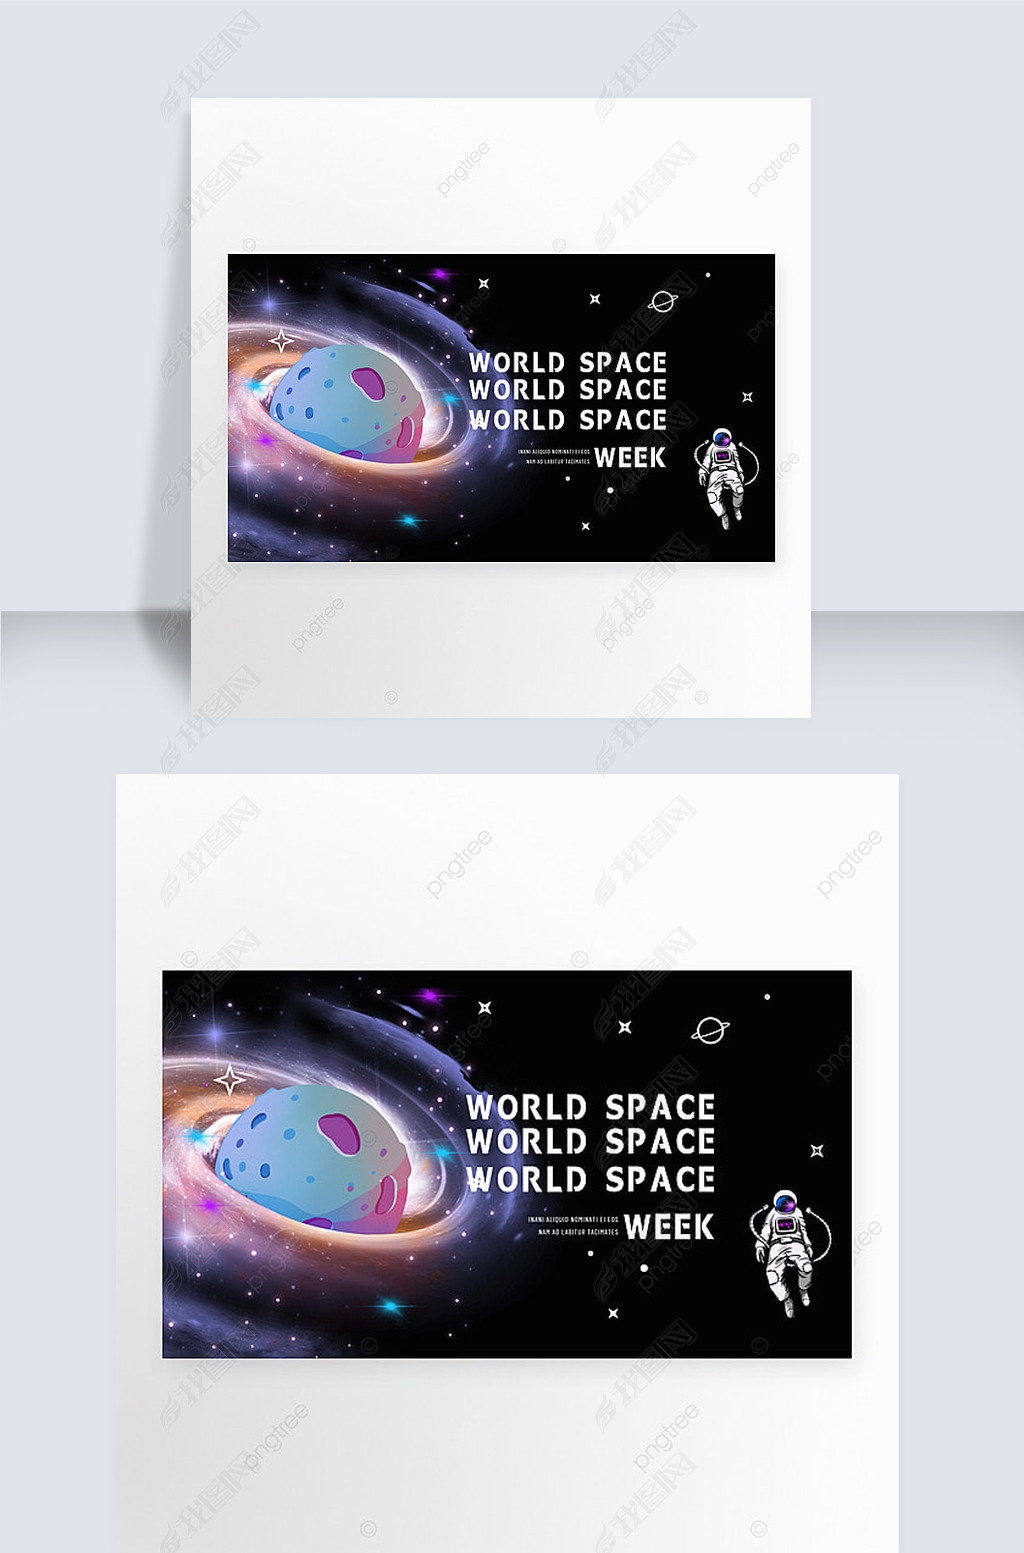 world space week festival poster